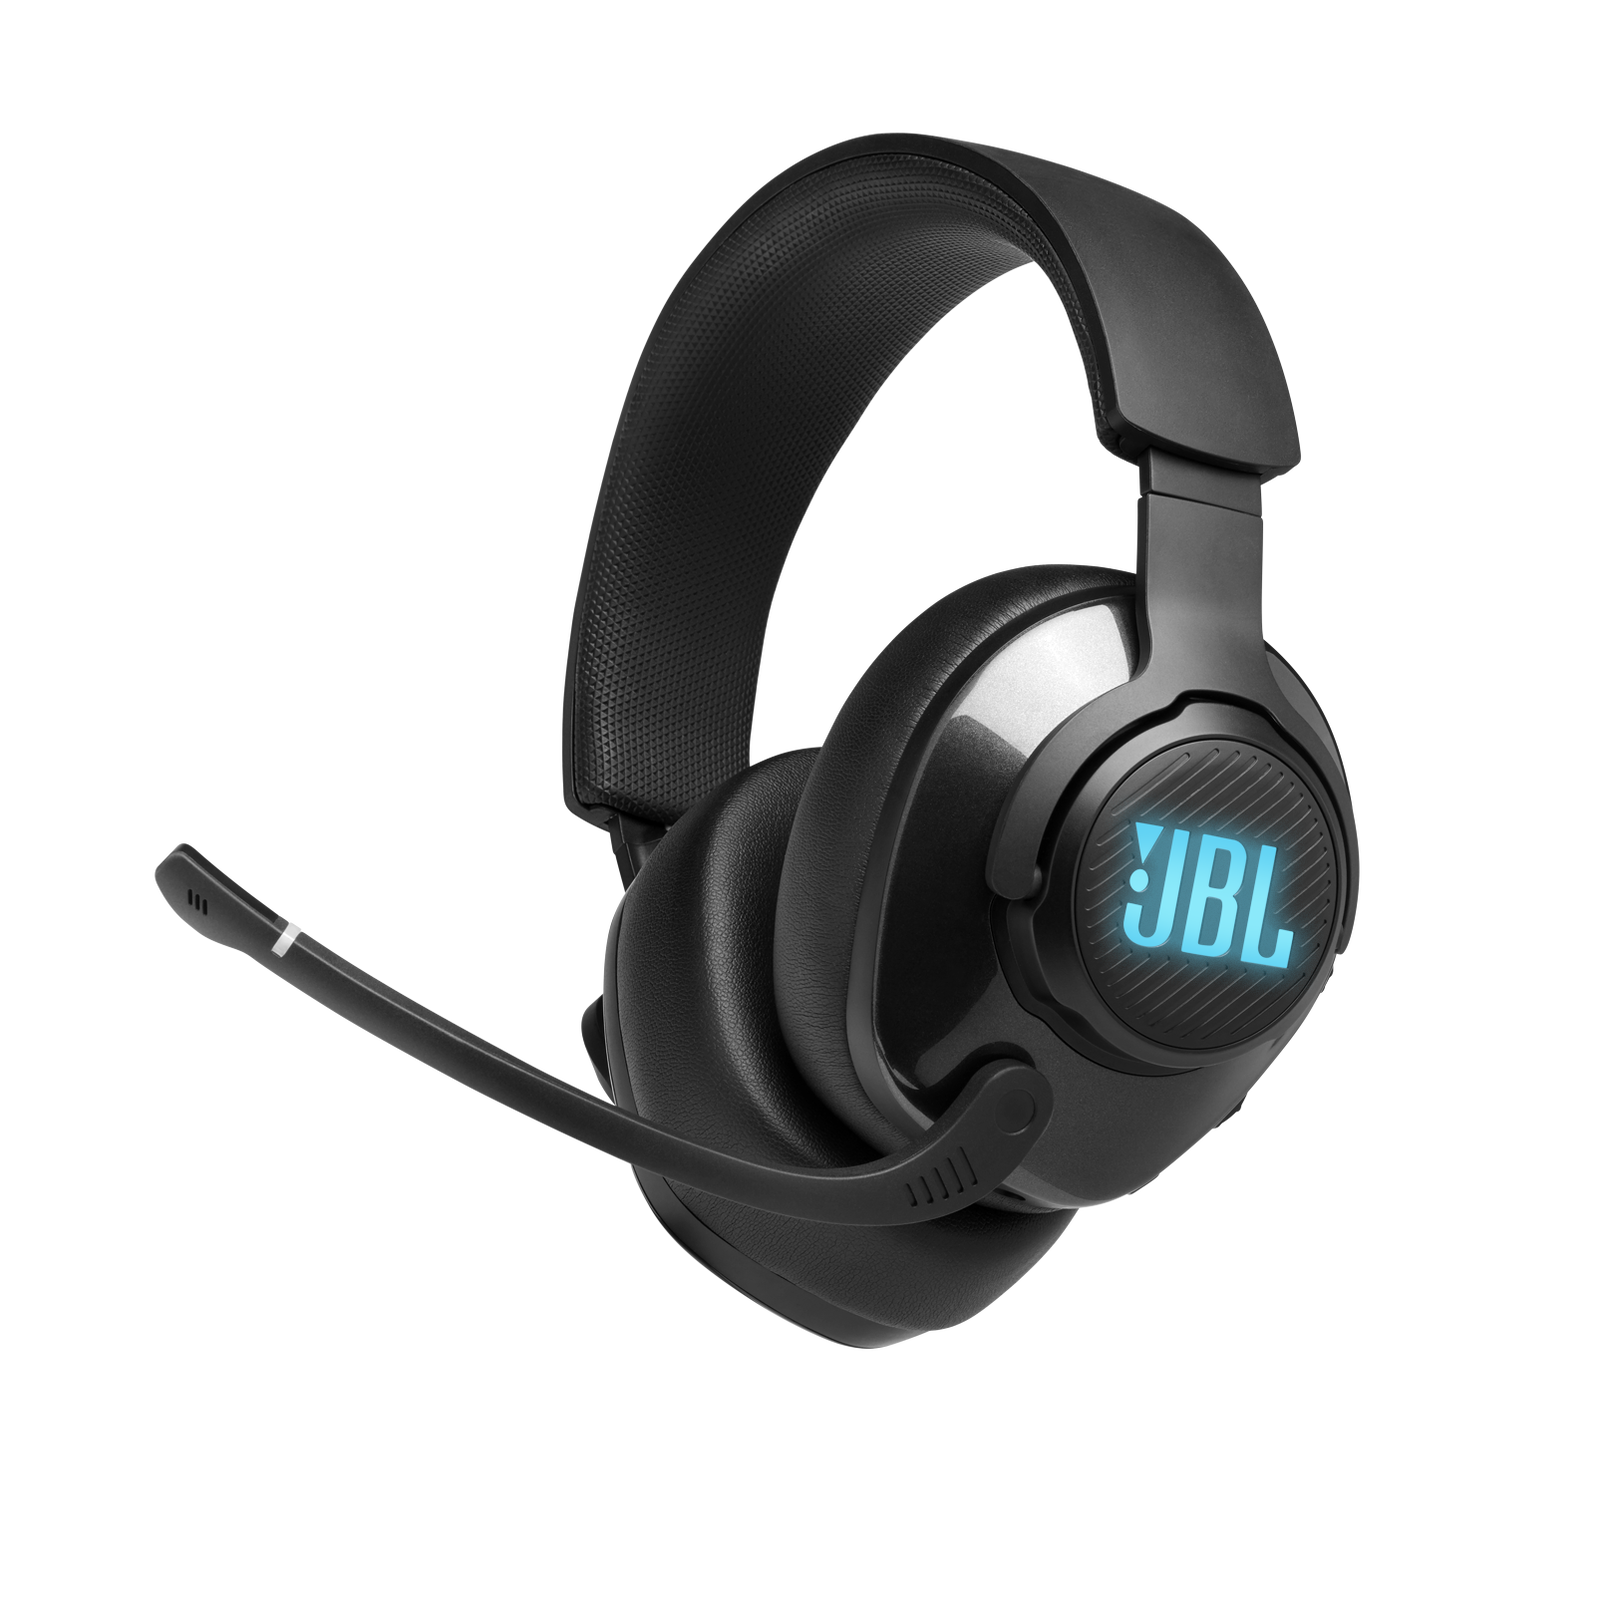 JBL Quantum 400 | Over-Ear Wired Gaming Headset -  7.1 Surround Sound & Mic Noise Cancelling - PS4/XBOX/Switch/pc Compatible Gaming Headset REFURBISHED